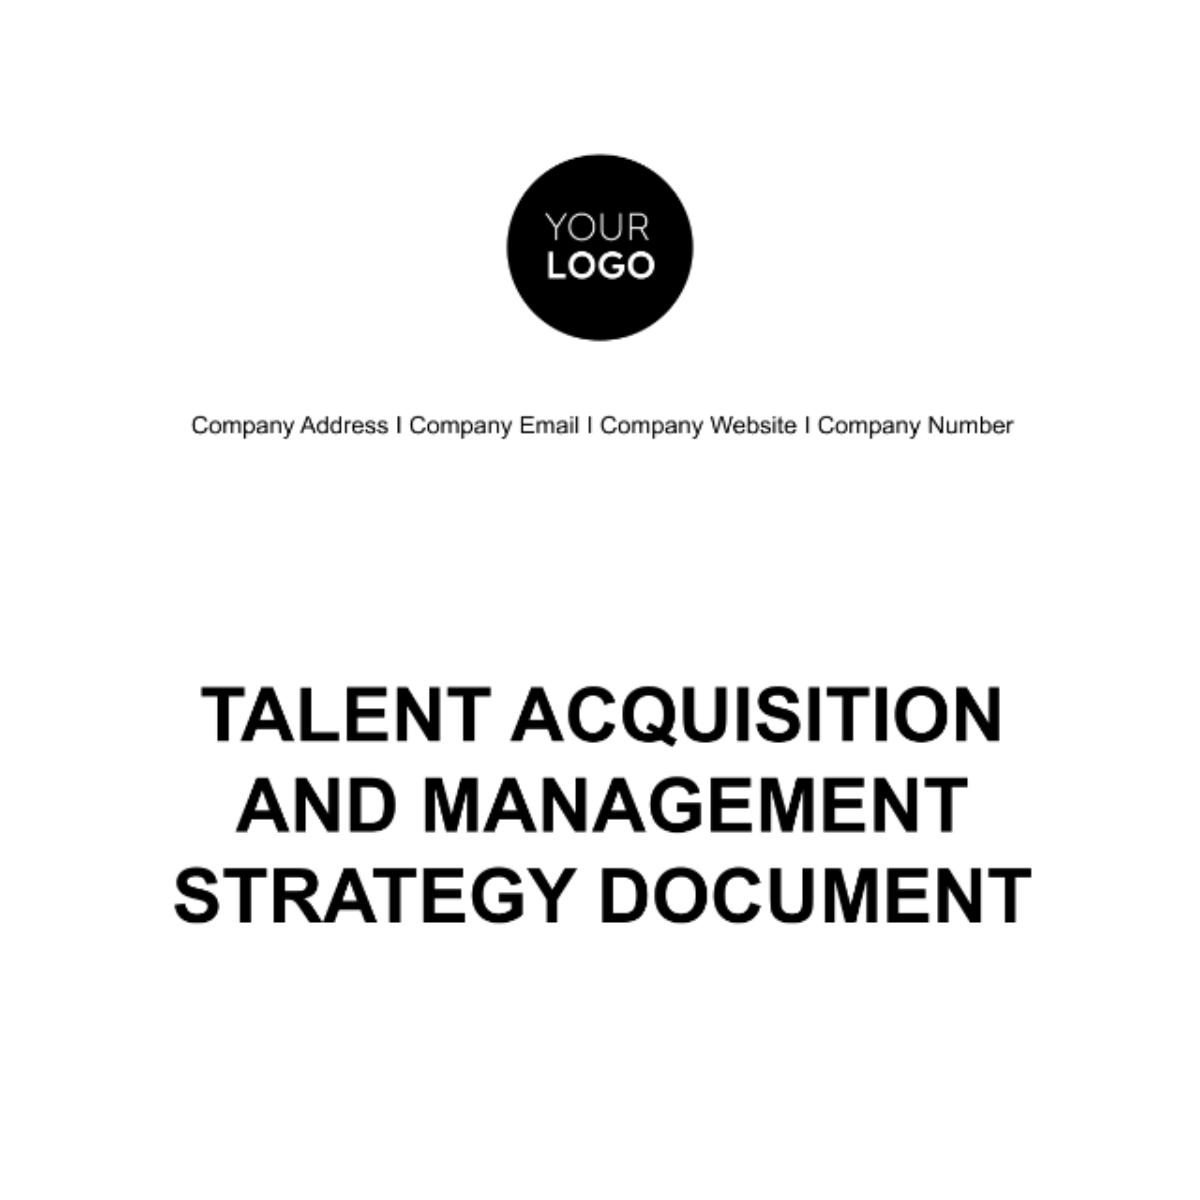 Free Talent Acquisition and Management Strategy Document HR Template